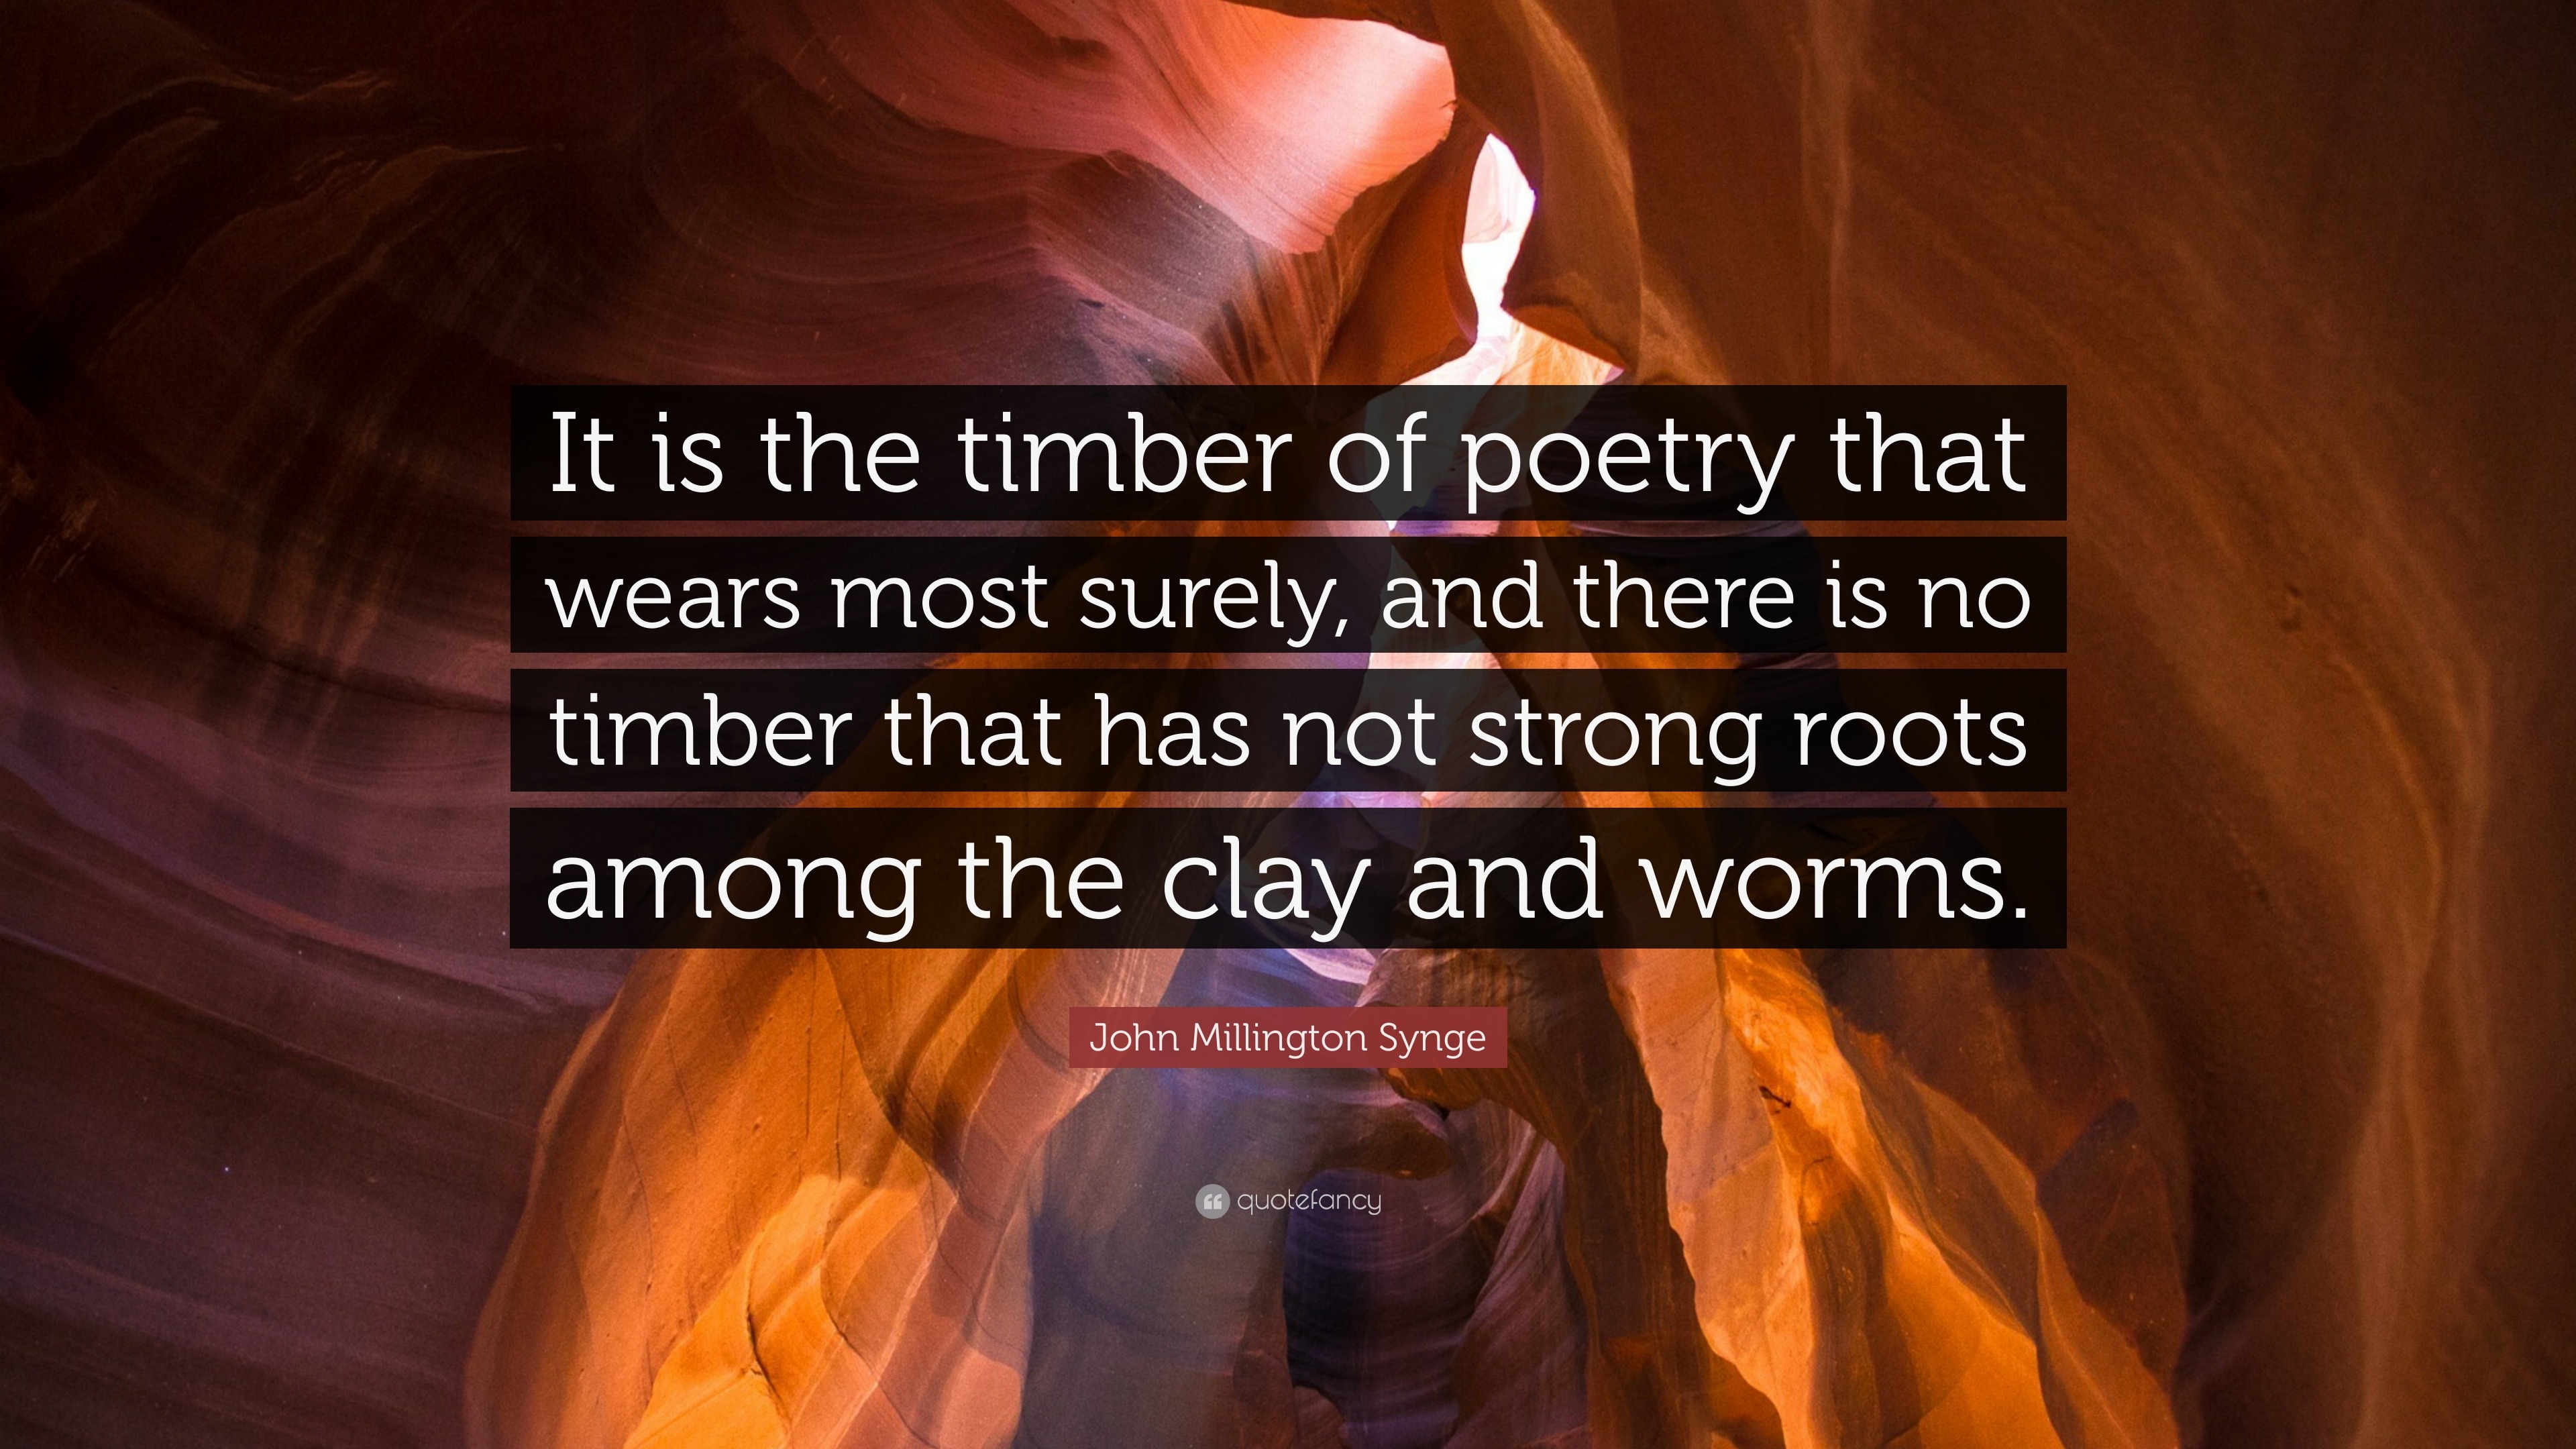 John Millington Synge Quote “it Is The Timber Of Poetry That Wears Most Surely And There Is No 5508